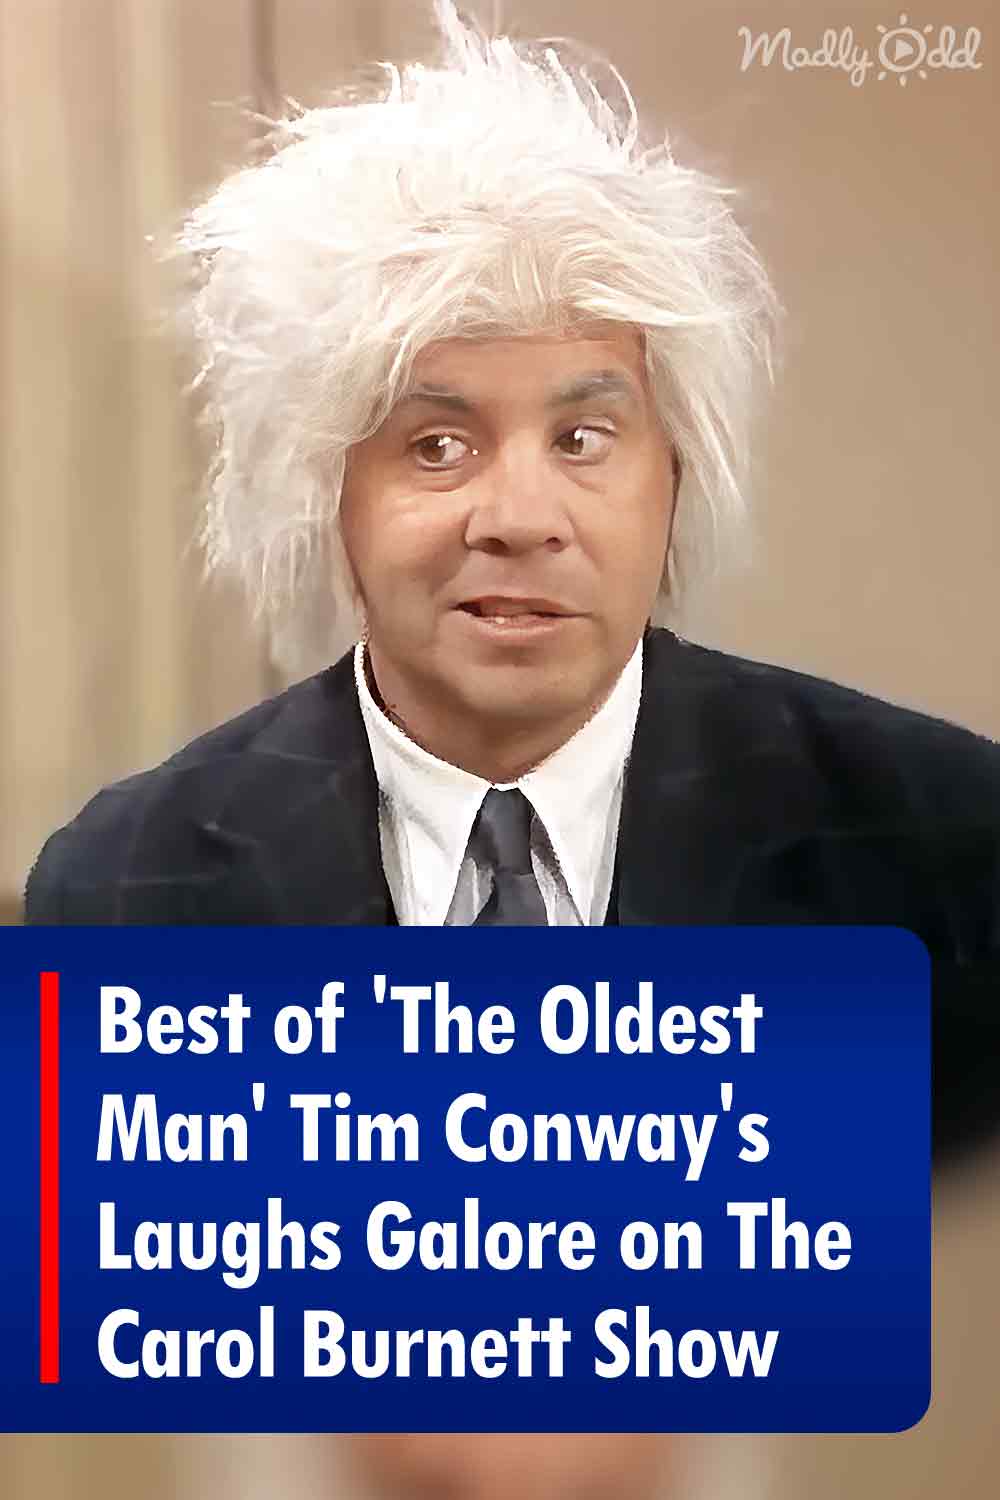 Best of \'The Oldest Man\' Tim Conway\'s Laughs Galore on The Carol Burnett Show